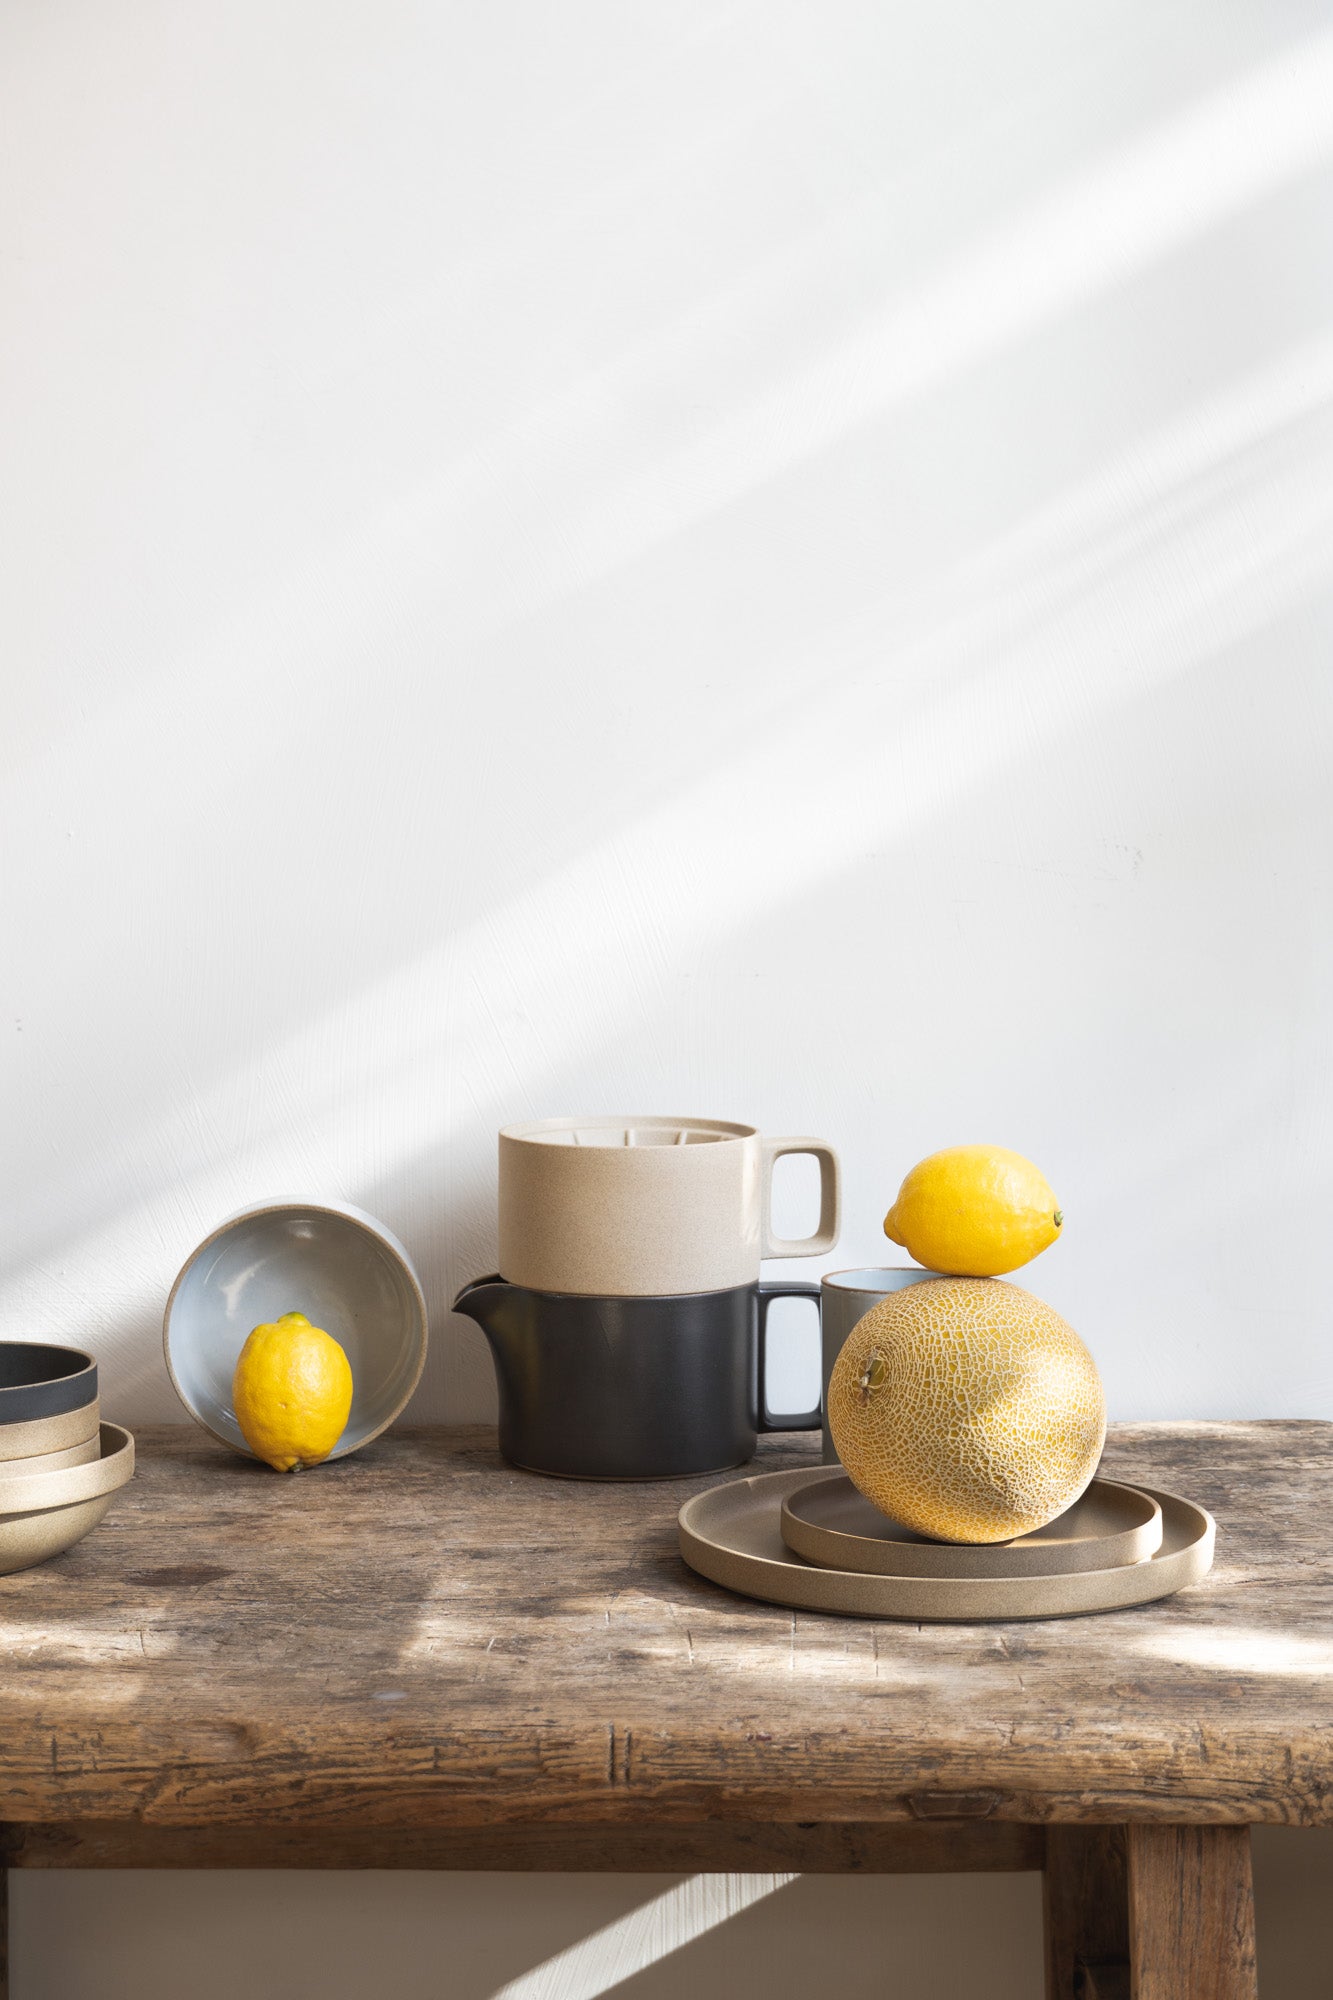 Rustic wooden table set with plates, mugs and coffee dripper. Accompanied by some lemons and a melon. All stackable and modular items by Hasami Porcelain.